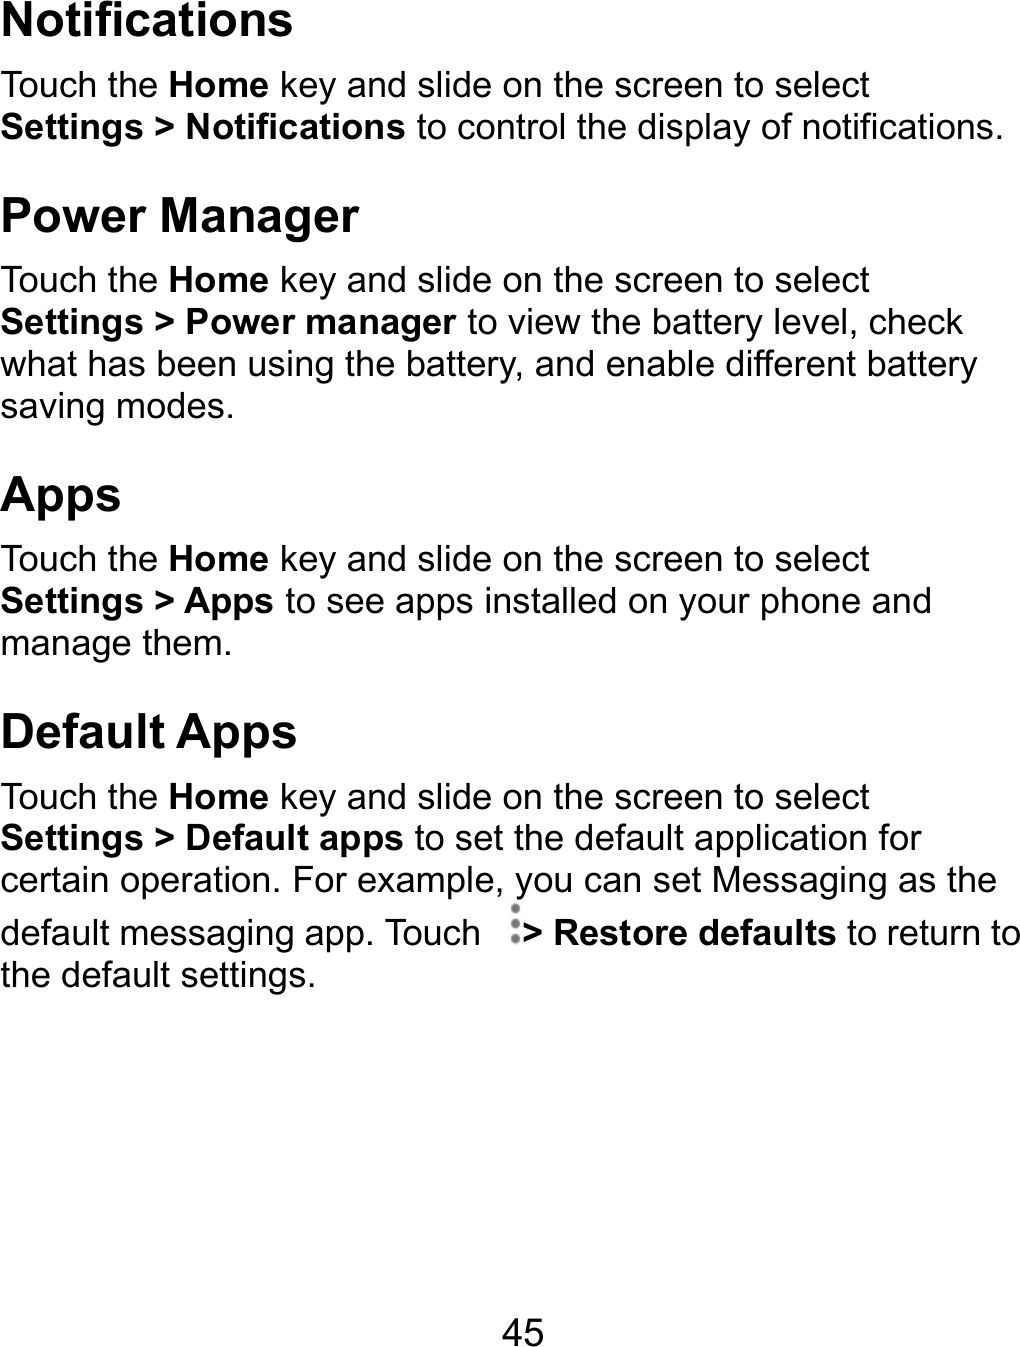 NotificTouch theSettings Power Touch theSettings what has saving moApps Touch theSettings manage tDefaultTouch theSettings certain opdefault methe defau   ations e Home key and &gt; NotificationsManager e Home key and &gt; Power managbeen using the bodes. e Home key and &gt; Apps to see athem. t Apps e Home key and &gt; Default appsperation. For exaessaging app. Tolt settings.  45 slide on the screto control the disslide on the screger to view the babattery, and enabslide on the screapps installed on slide on the screto set the defaulample, you can seouch  &gt; Restoreeen to select splay of notificatieen to select attery level, checble different batteeen to select your phone and een to select t application for et Messaging ase defaults to retuons. ck ery  the urn to 